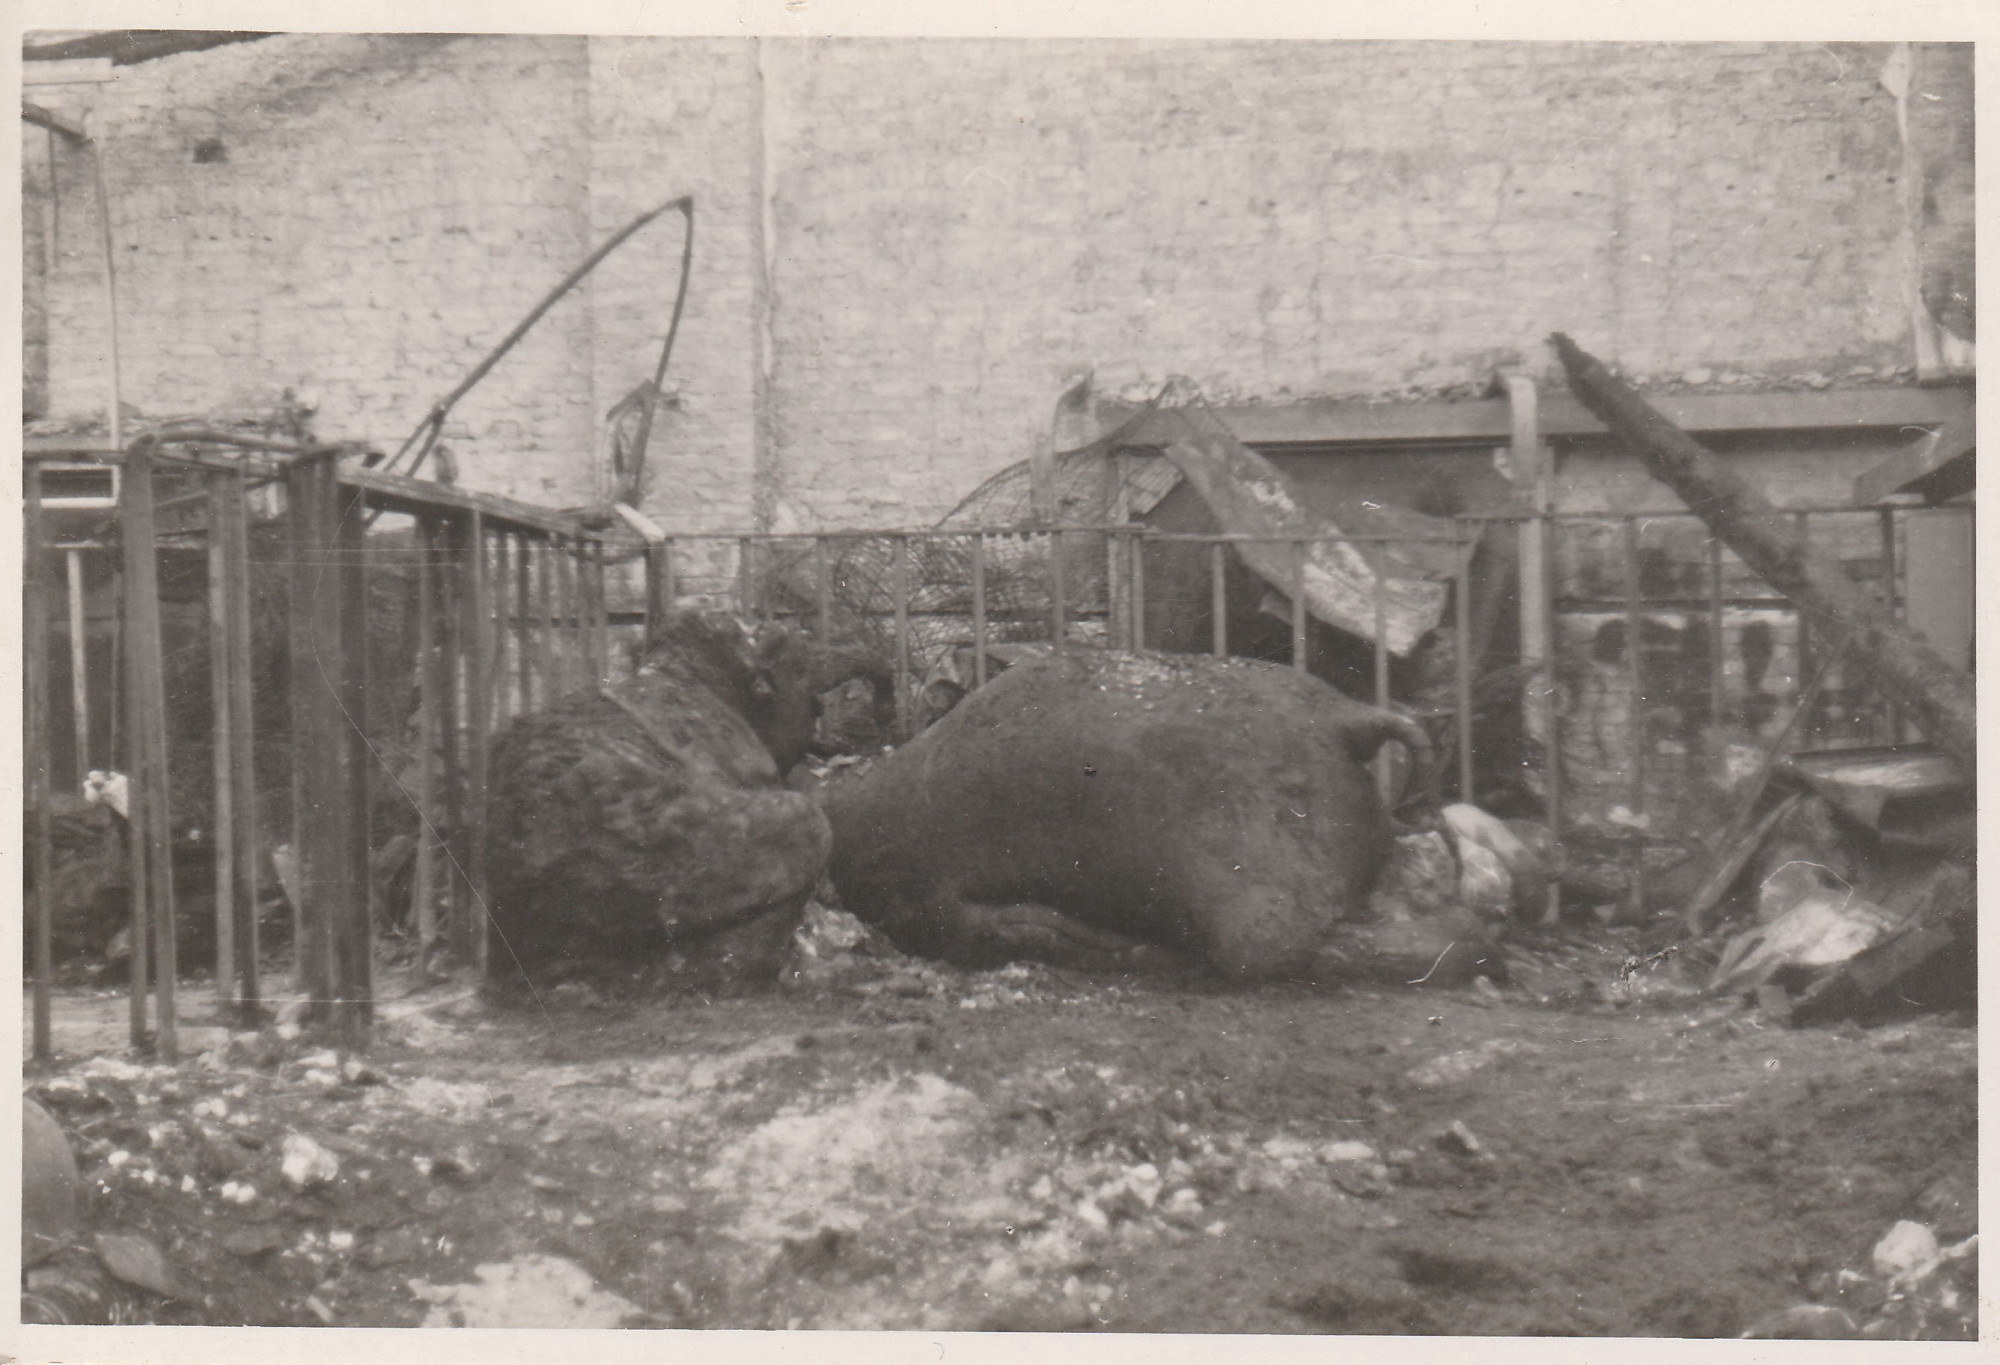 Black and white photograph: Emaciated elephant lying on its side amongst the rubble.